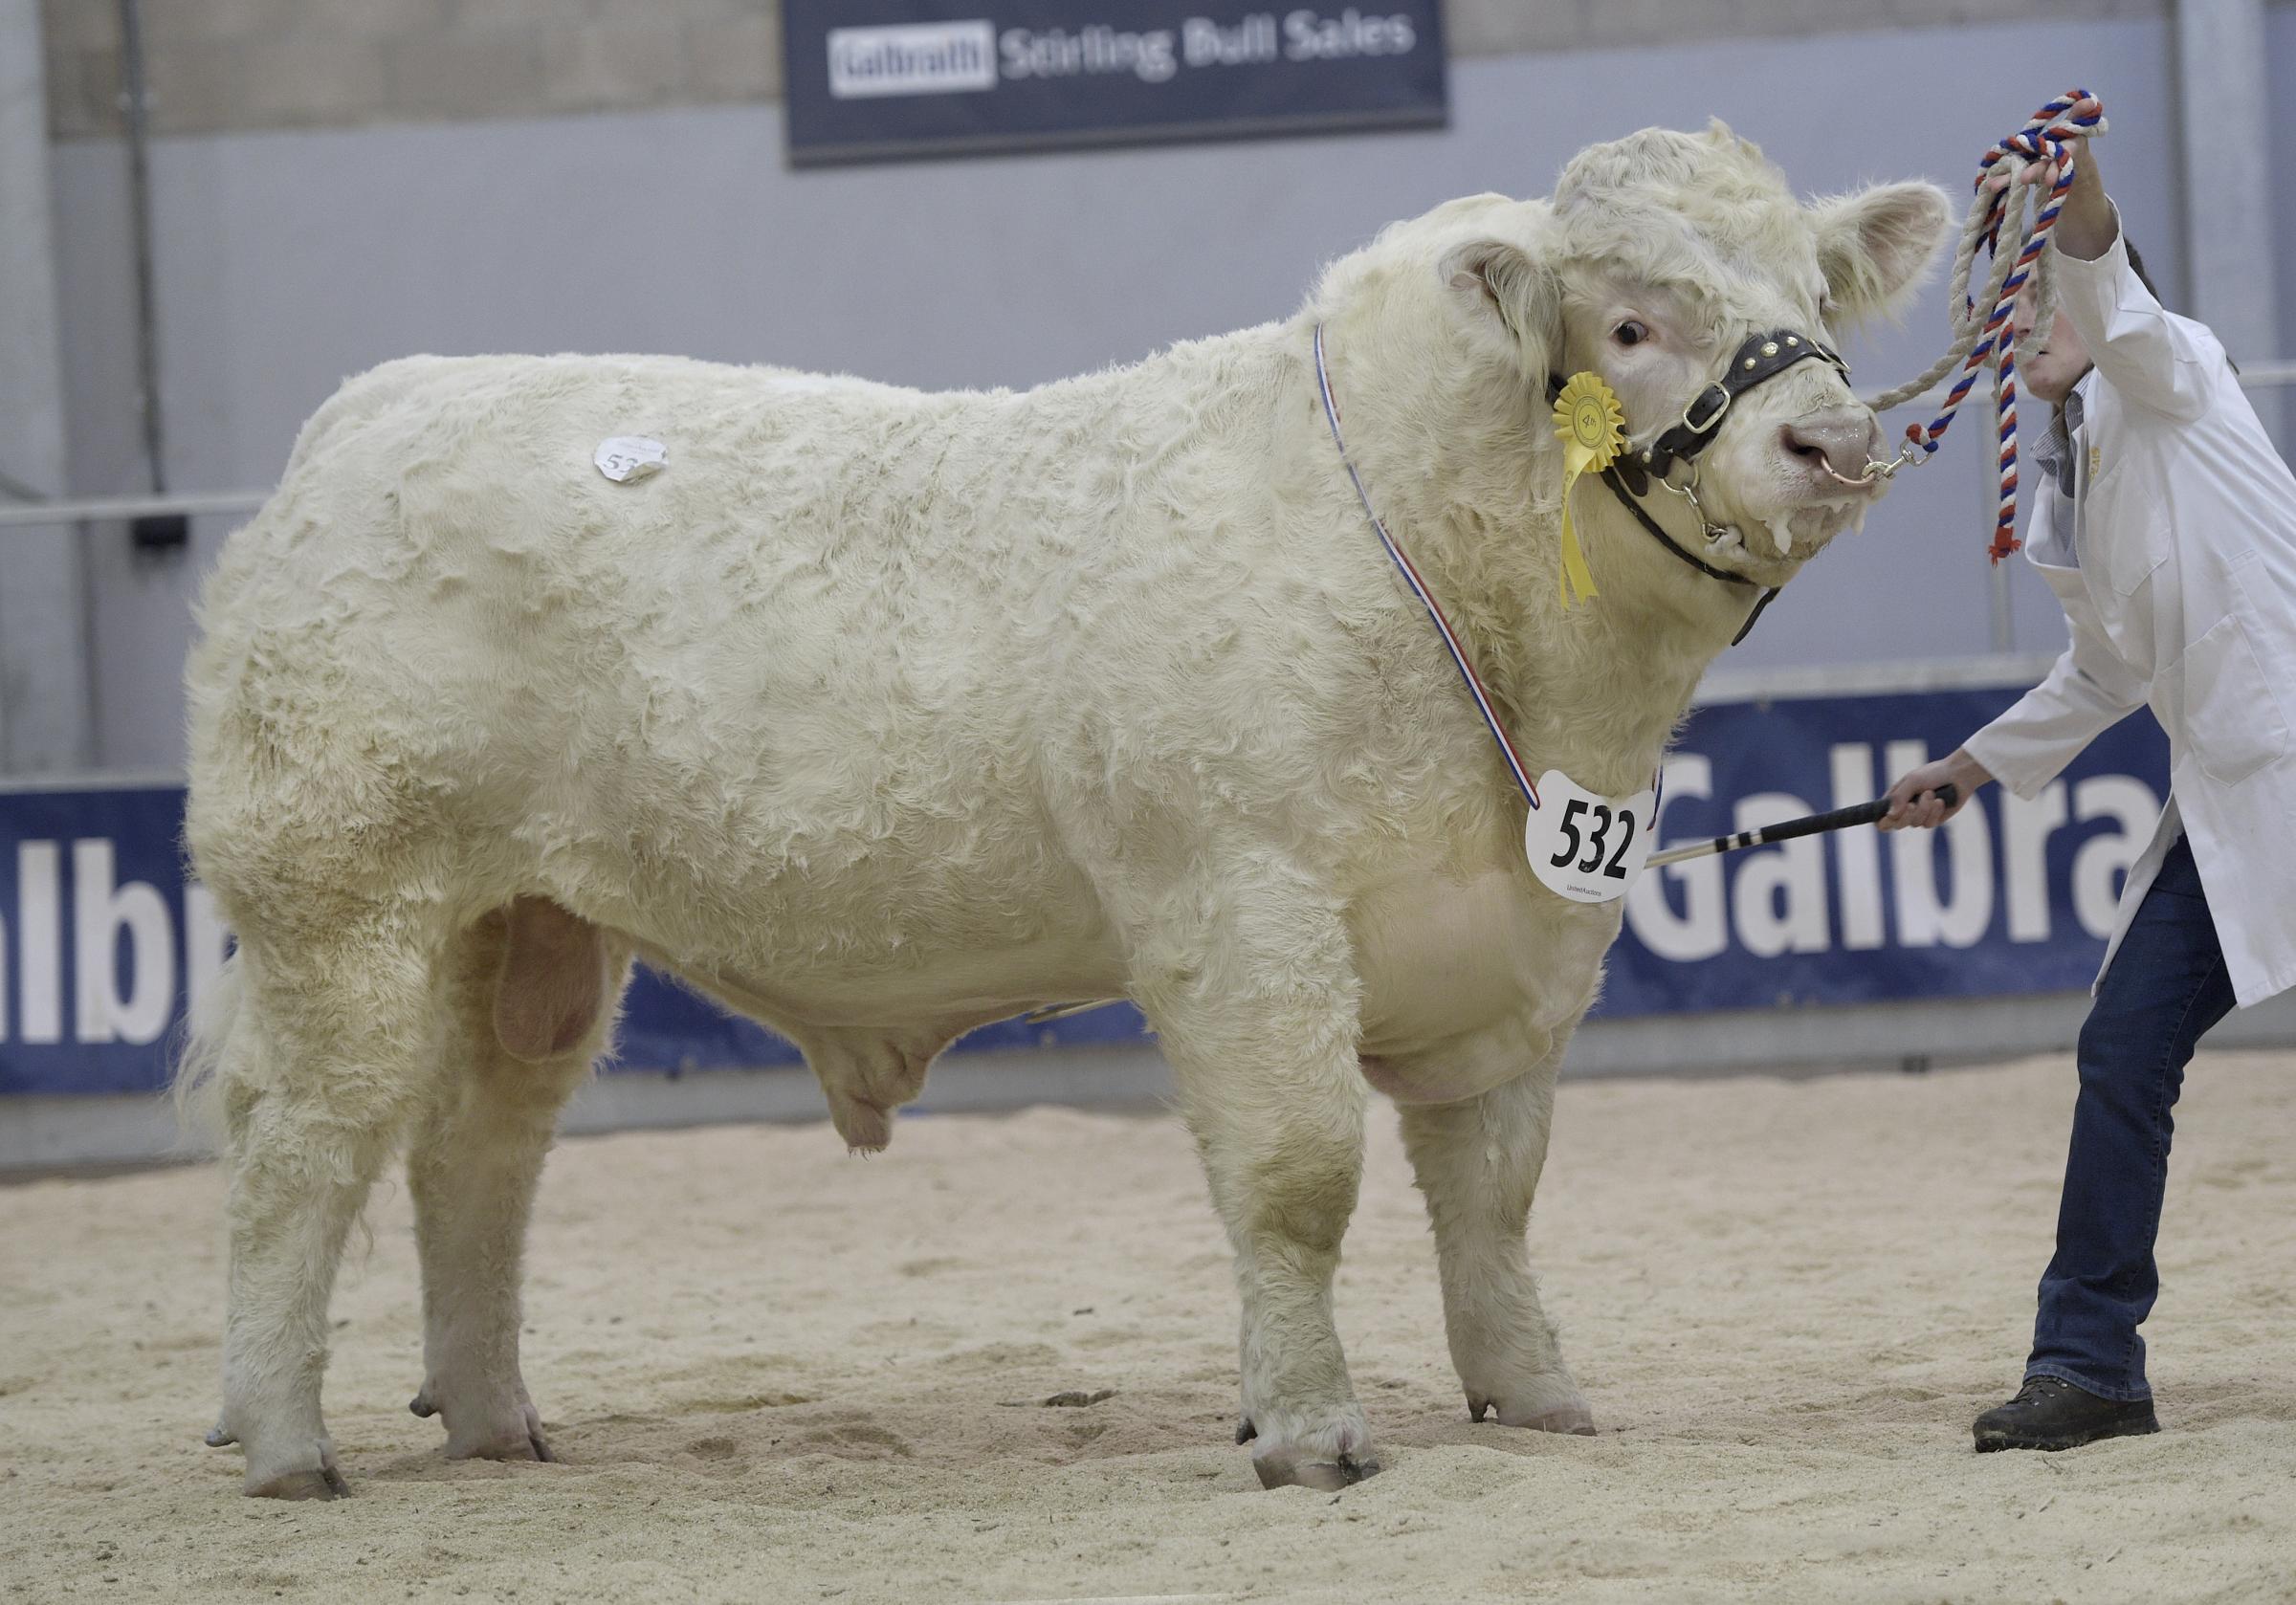 Another from A Drysdale made 10,000gns this was for Glenericht Travis